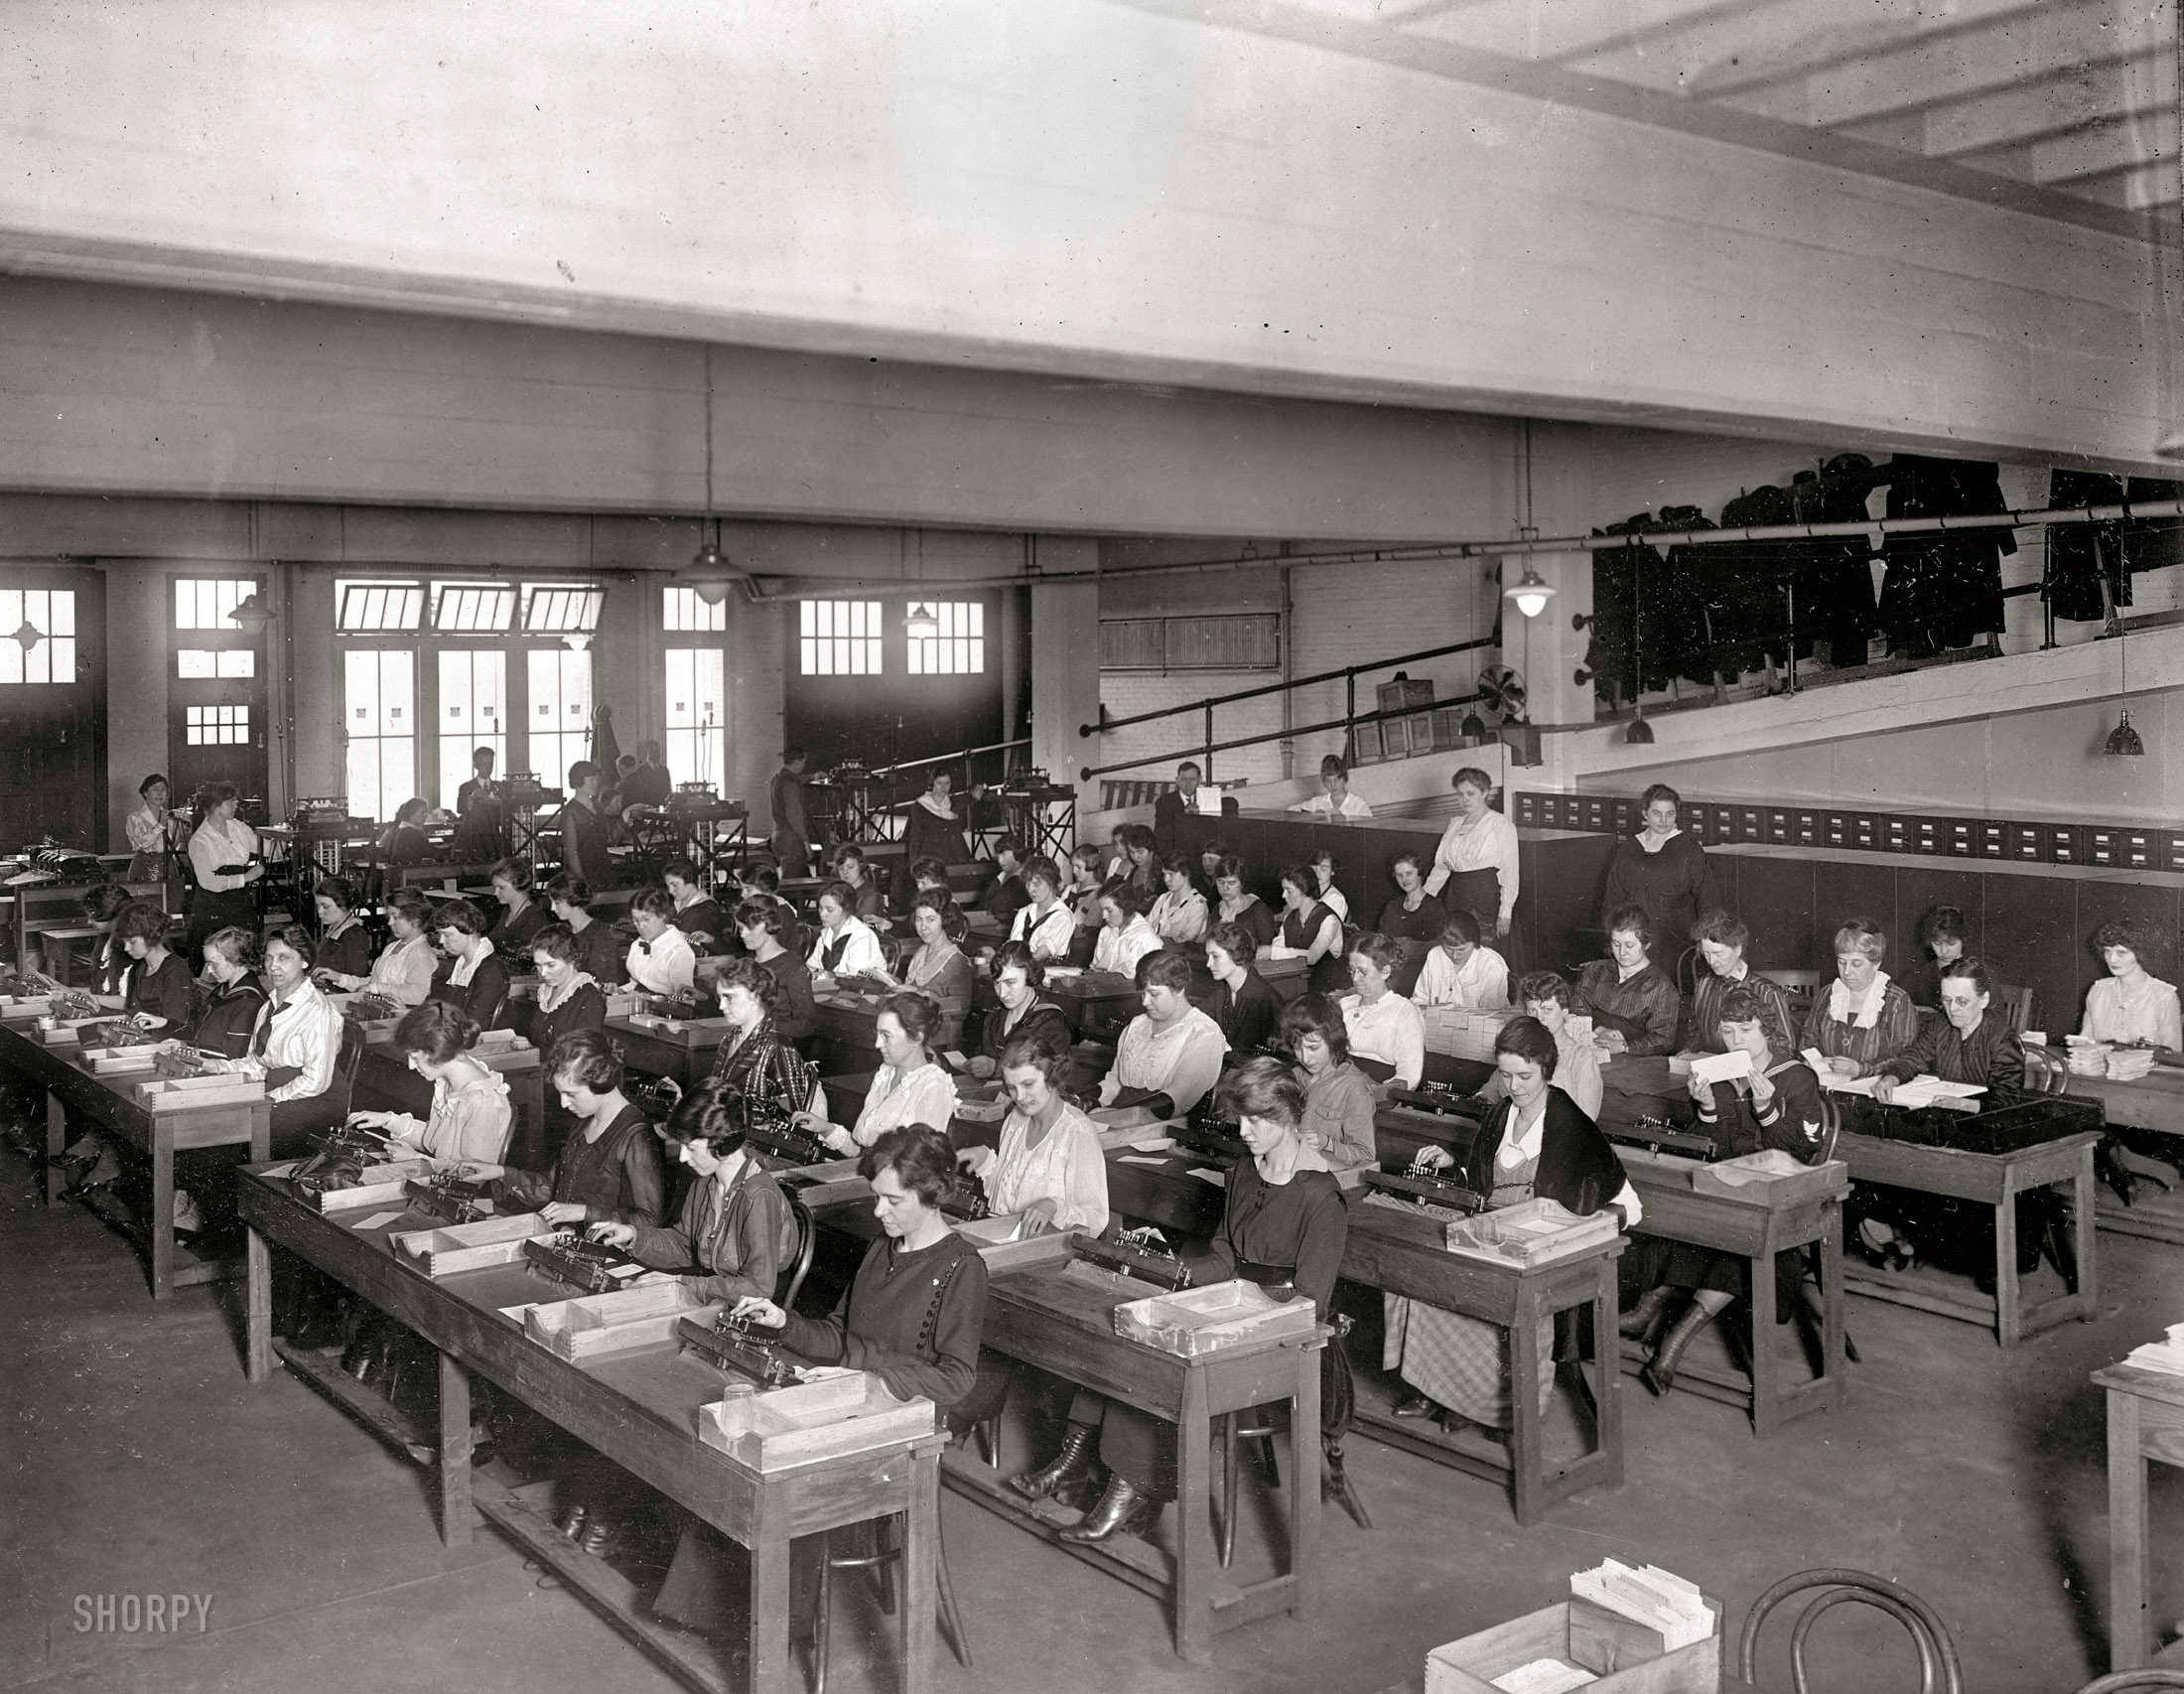 Washington, D.C., circa 1920. One of half a dozen images labeled "Tabulating Machine Co." Harris & Ewing Collection glass negative. View full size.